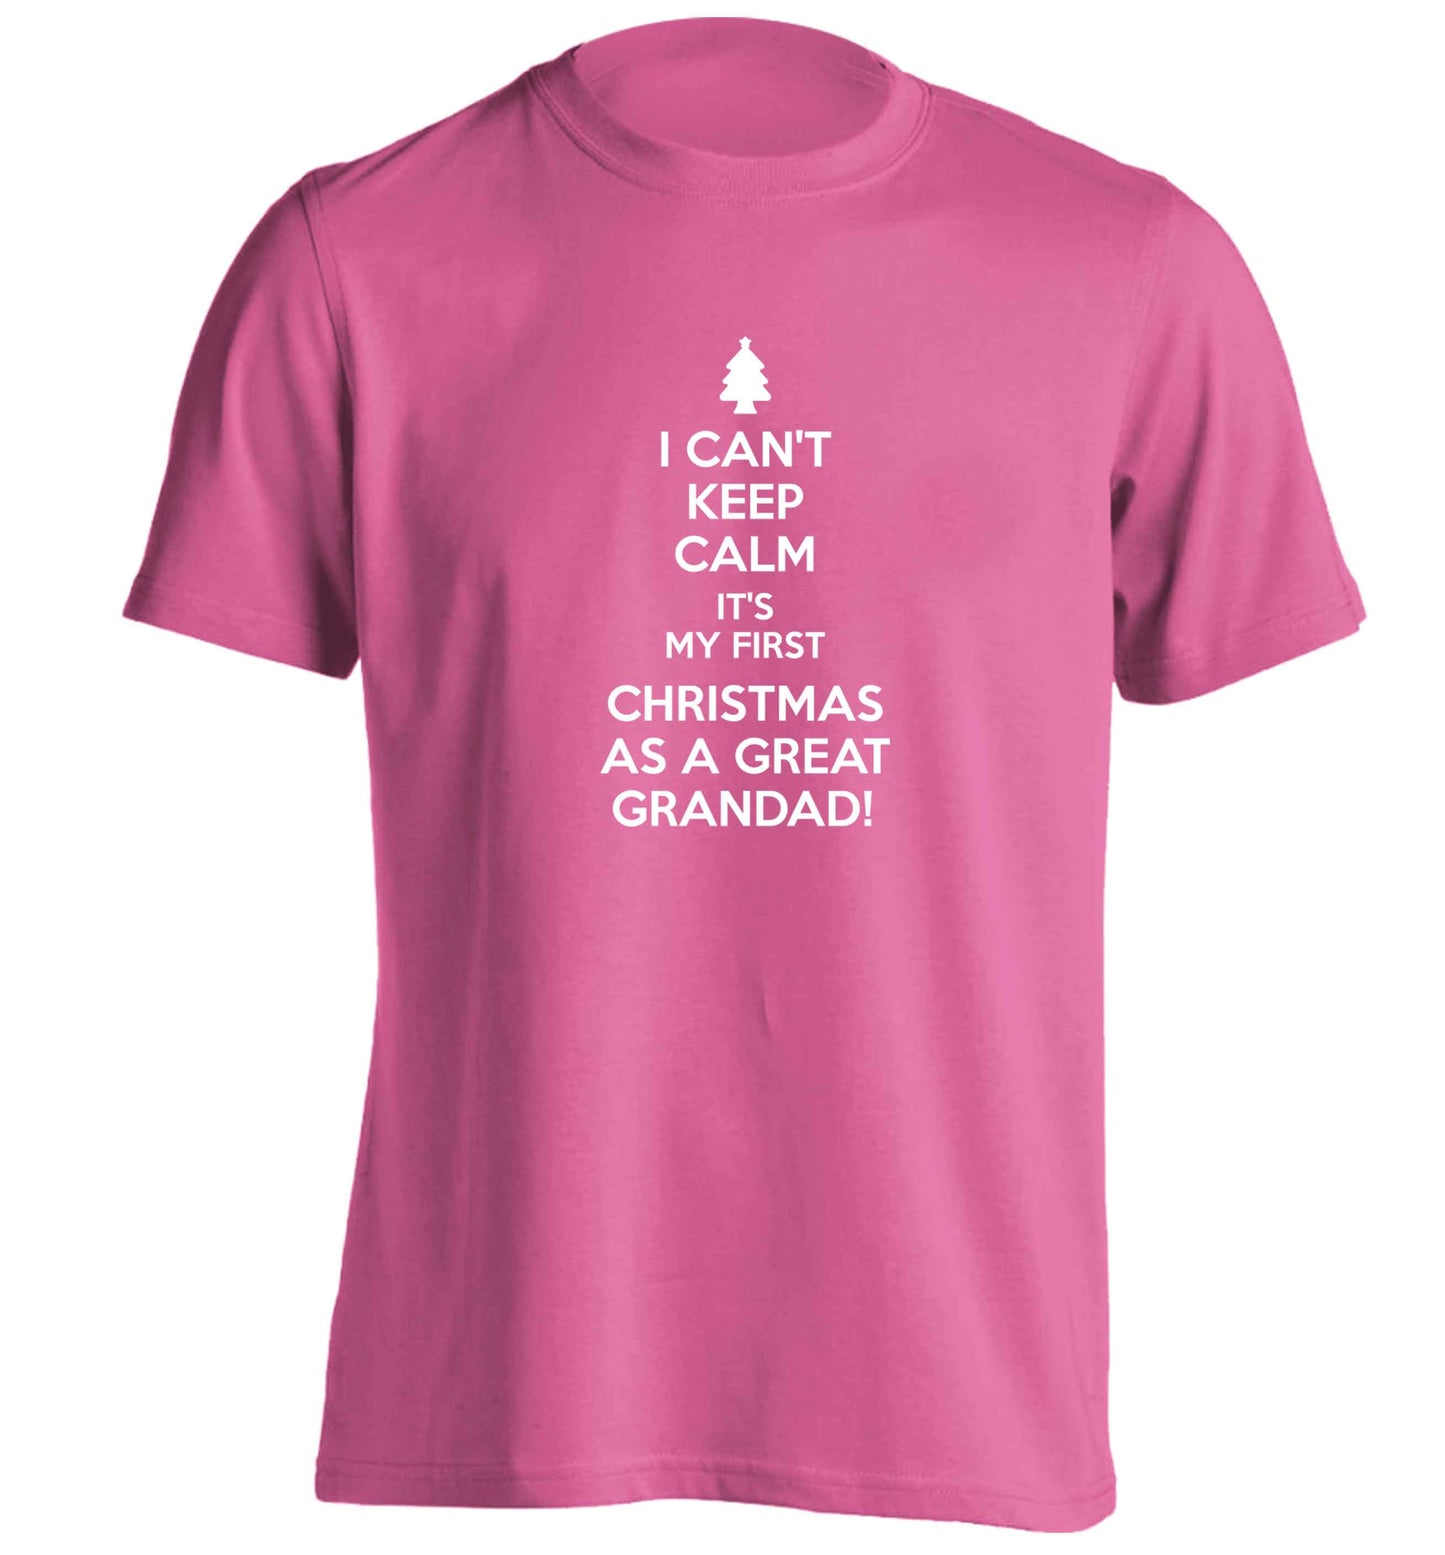 I can't keep calm it's my first Christmas as a great grandad! adults unisex pink Tshirt 2XL